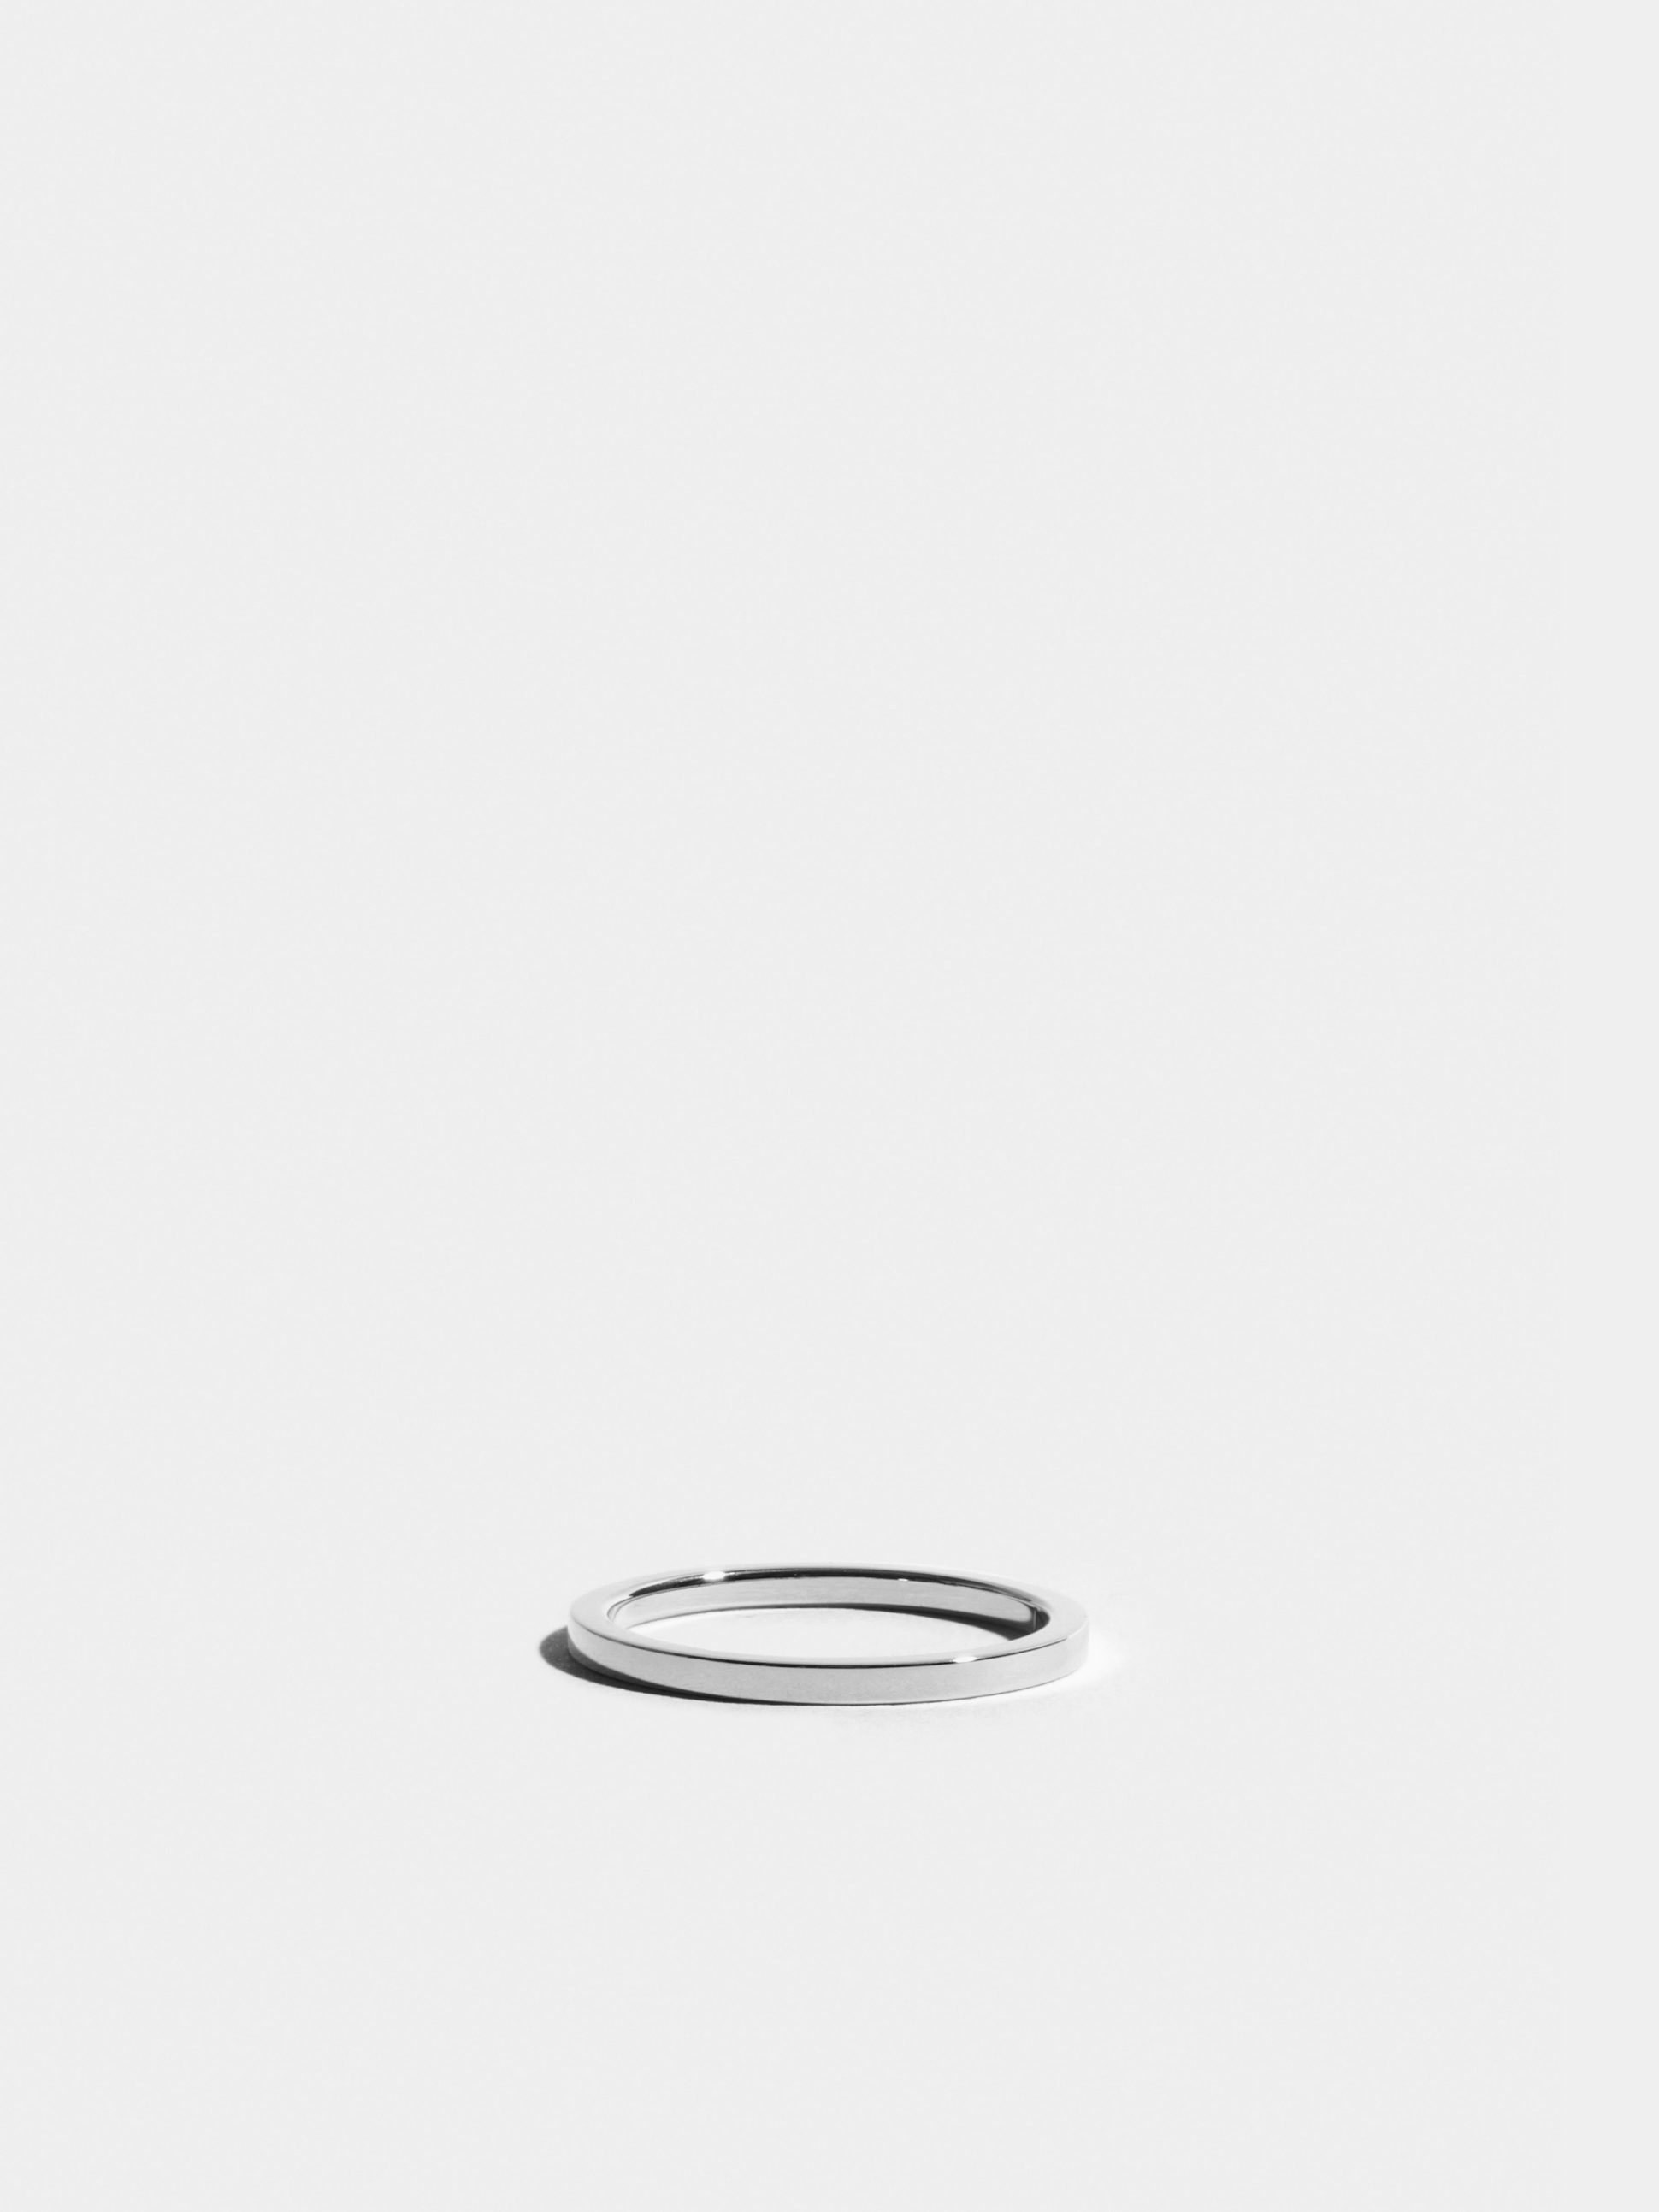 Anagramme flat ribbon ring in 18k Fairmined ethical white gold